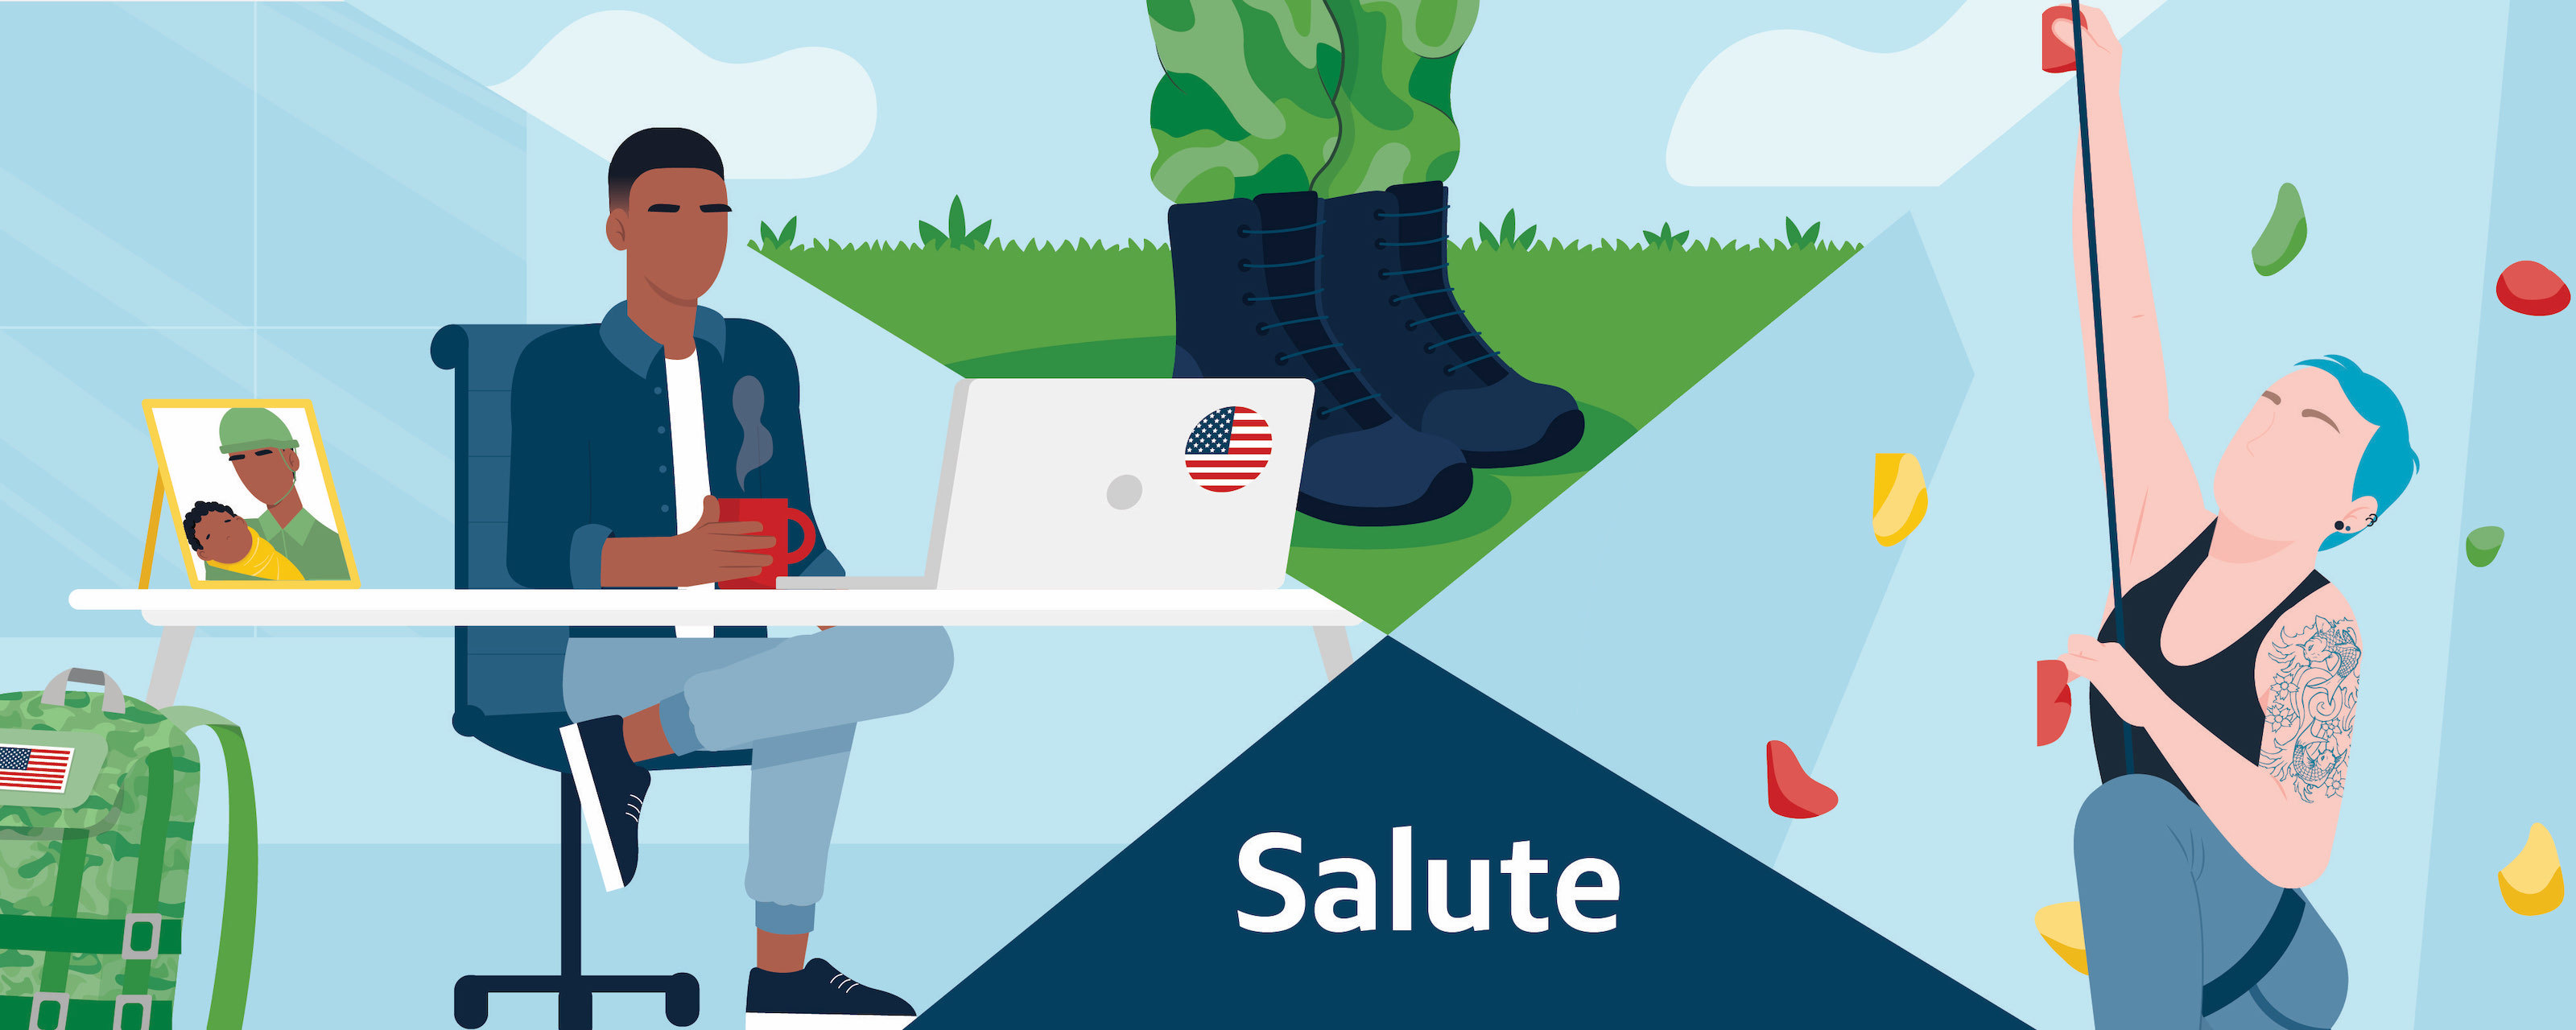 Illustration collage of Capital One BRG Salute associates, one at his computer, one climbing, and a pair of boots